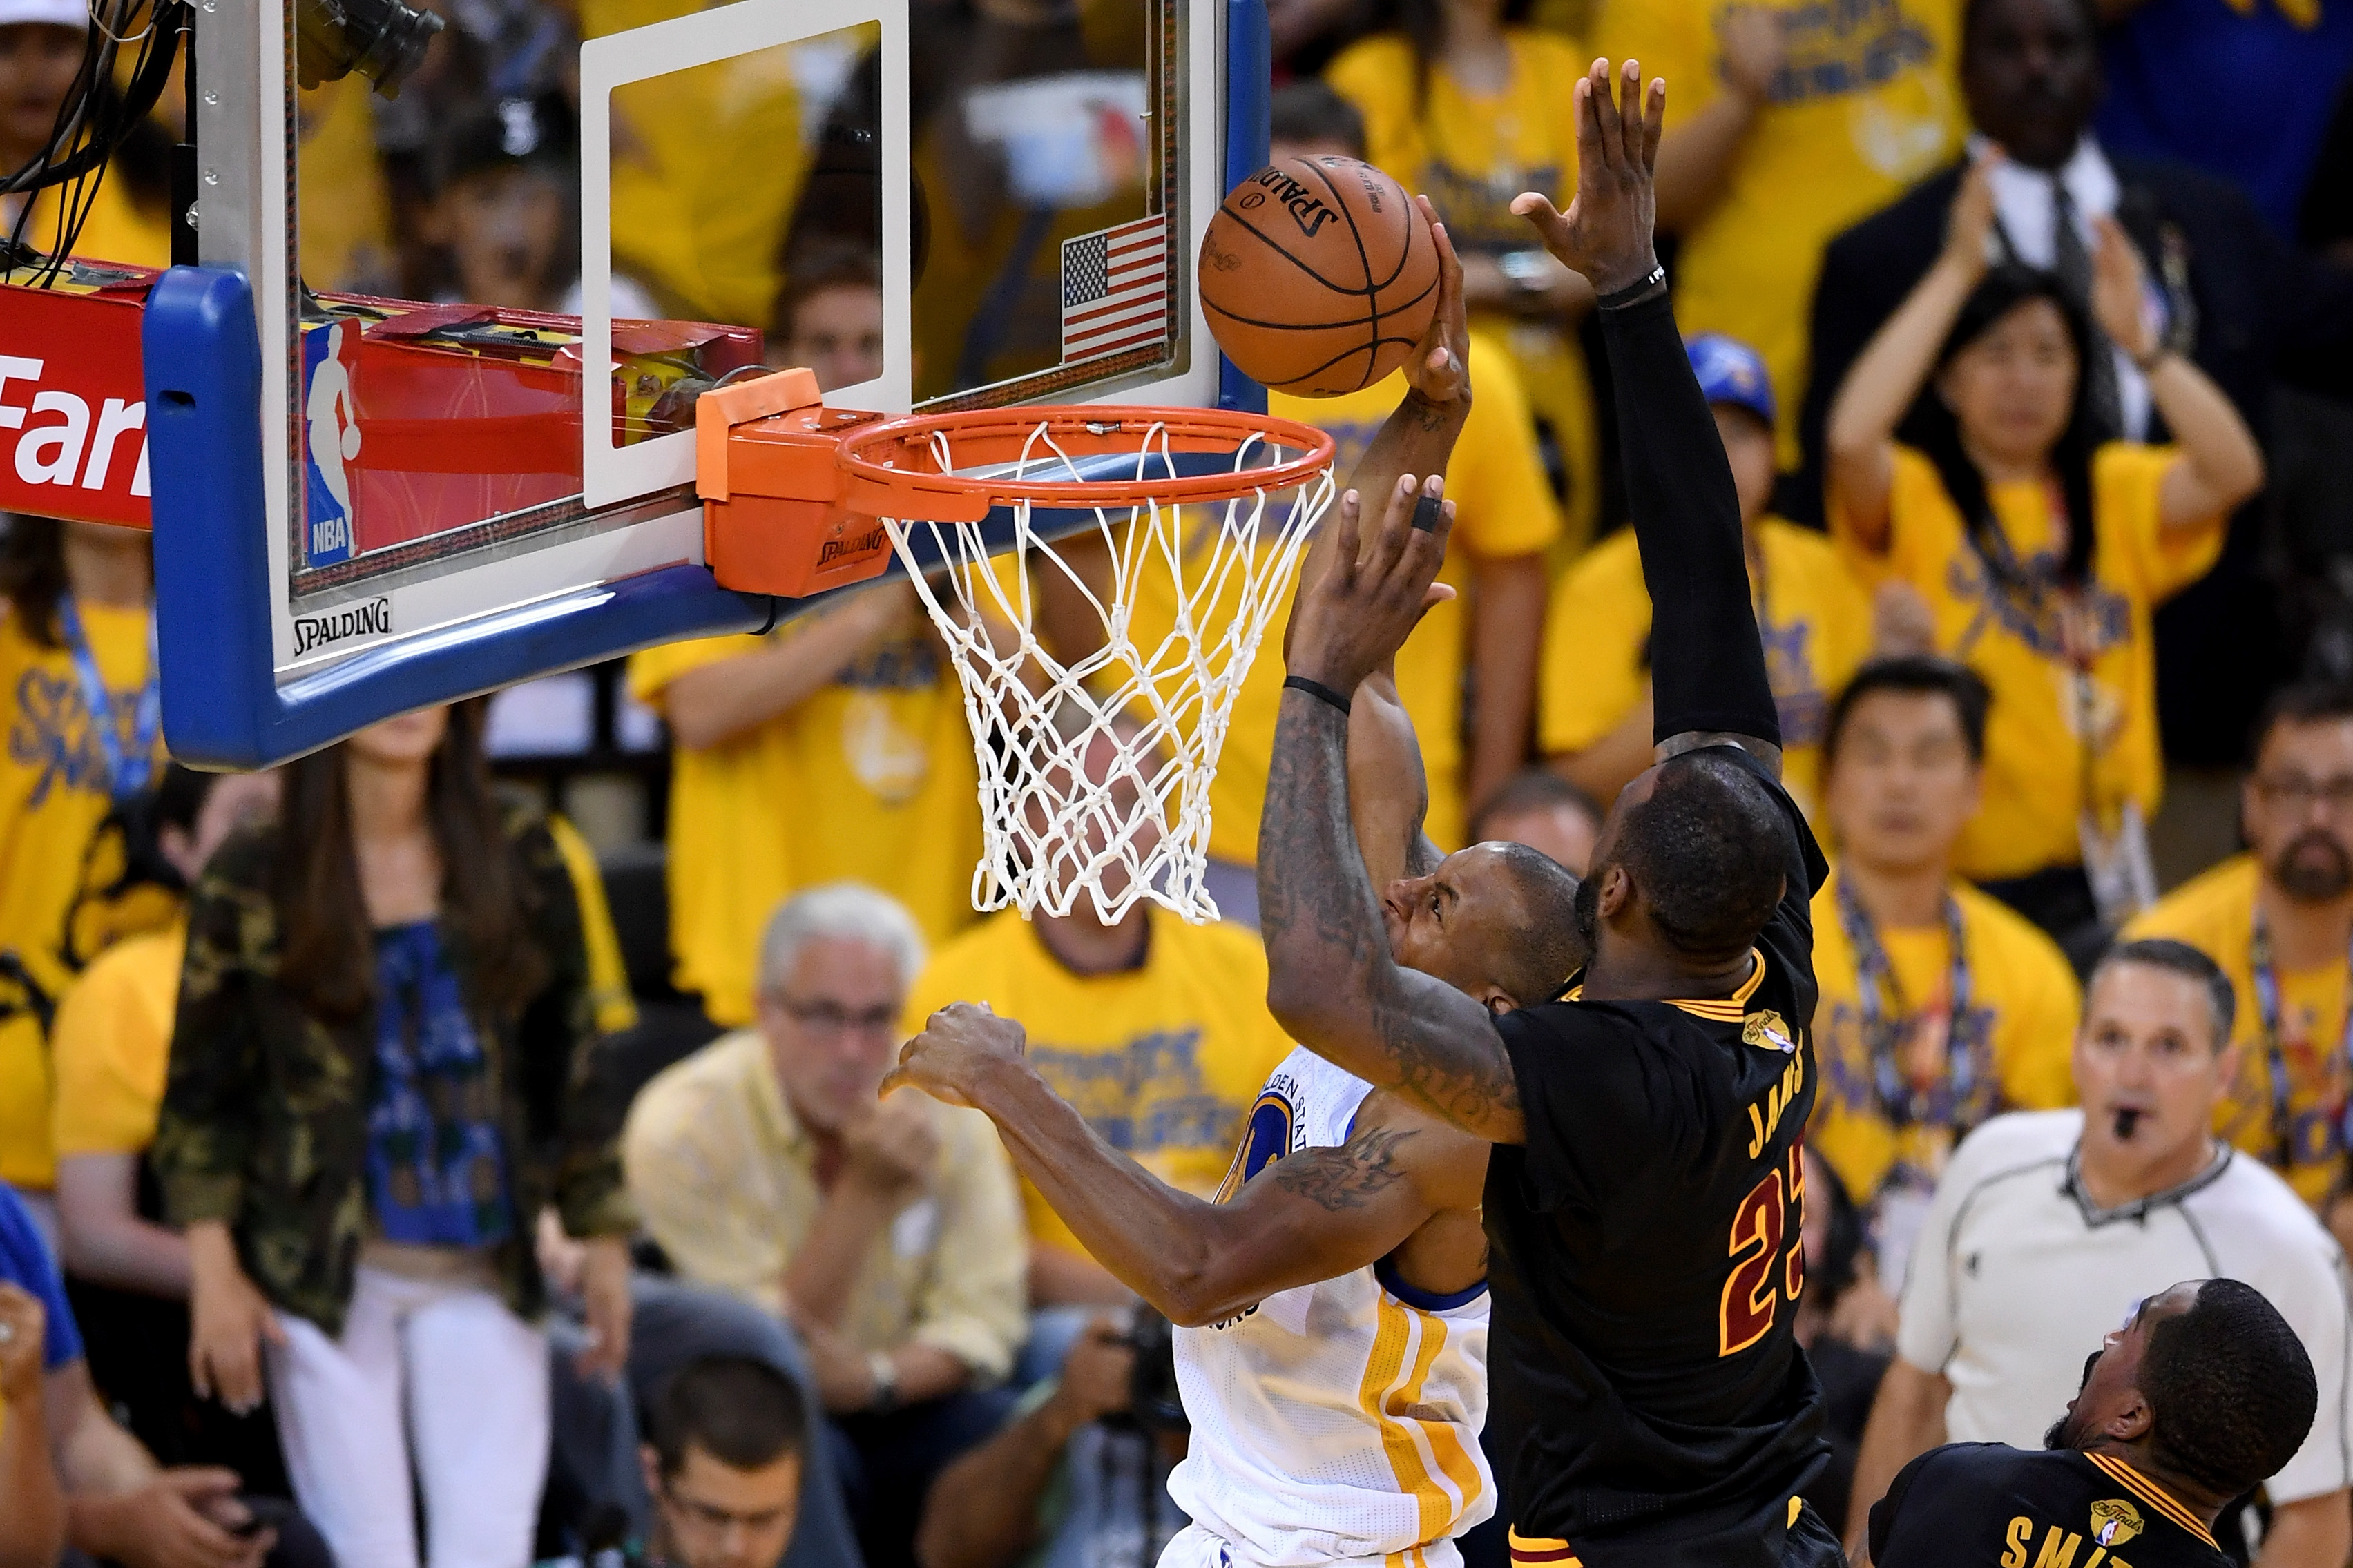 OAKLAND, CA - JUNE 19: LeBron James #23 of the Cleveland Cavaliers blocks a shot by Andre Iguodala #9 of the Golden State Warriors in Game 7 of the 2016 NBA Finals at ORACLE Arena on June 19, 2016 in Oakland, California. NOTE TO USER: User expressly acknowledges and agrees that, by downloading and or using this photograph, User is consenting to the terms and conditions of the Getty Images License Agreement. (Photo by Thearon W. Henderson/Getty Images)